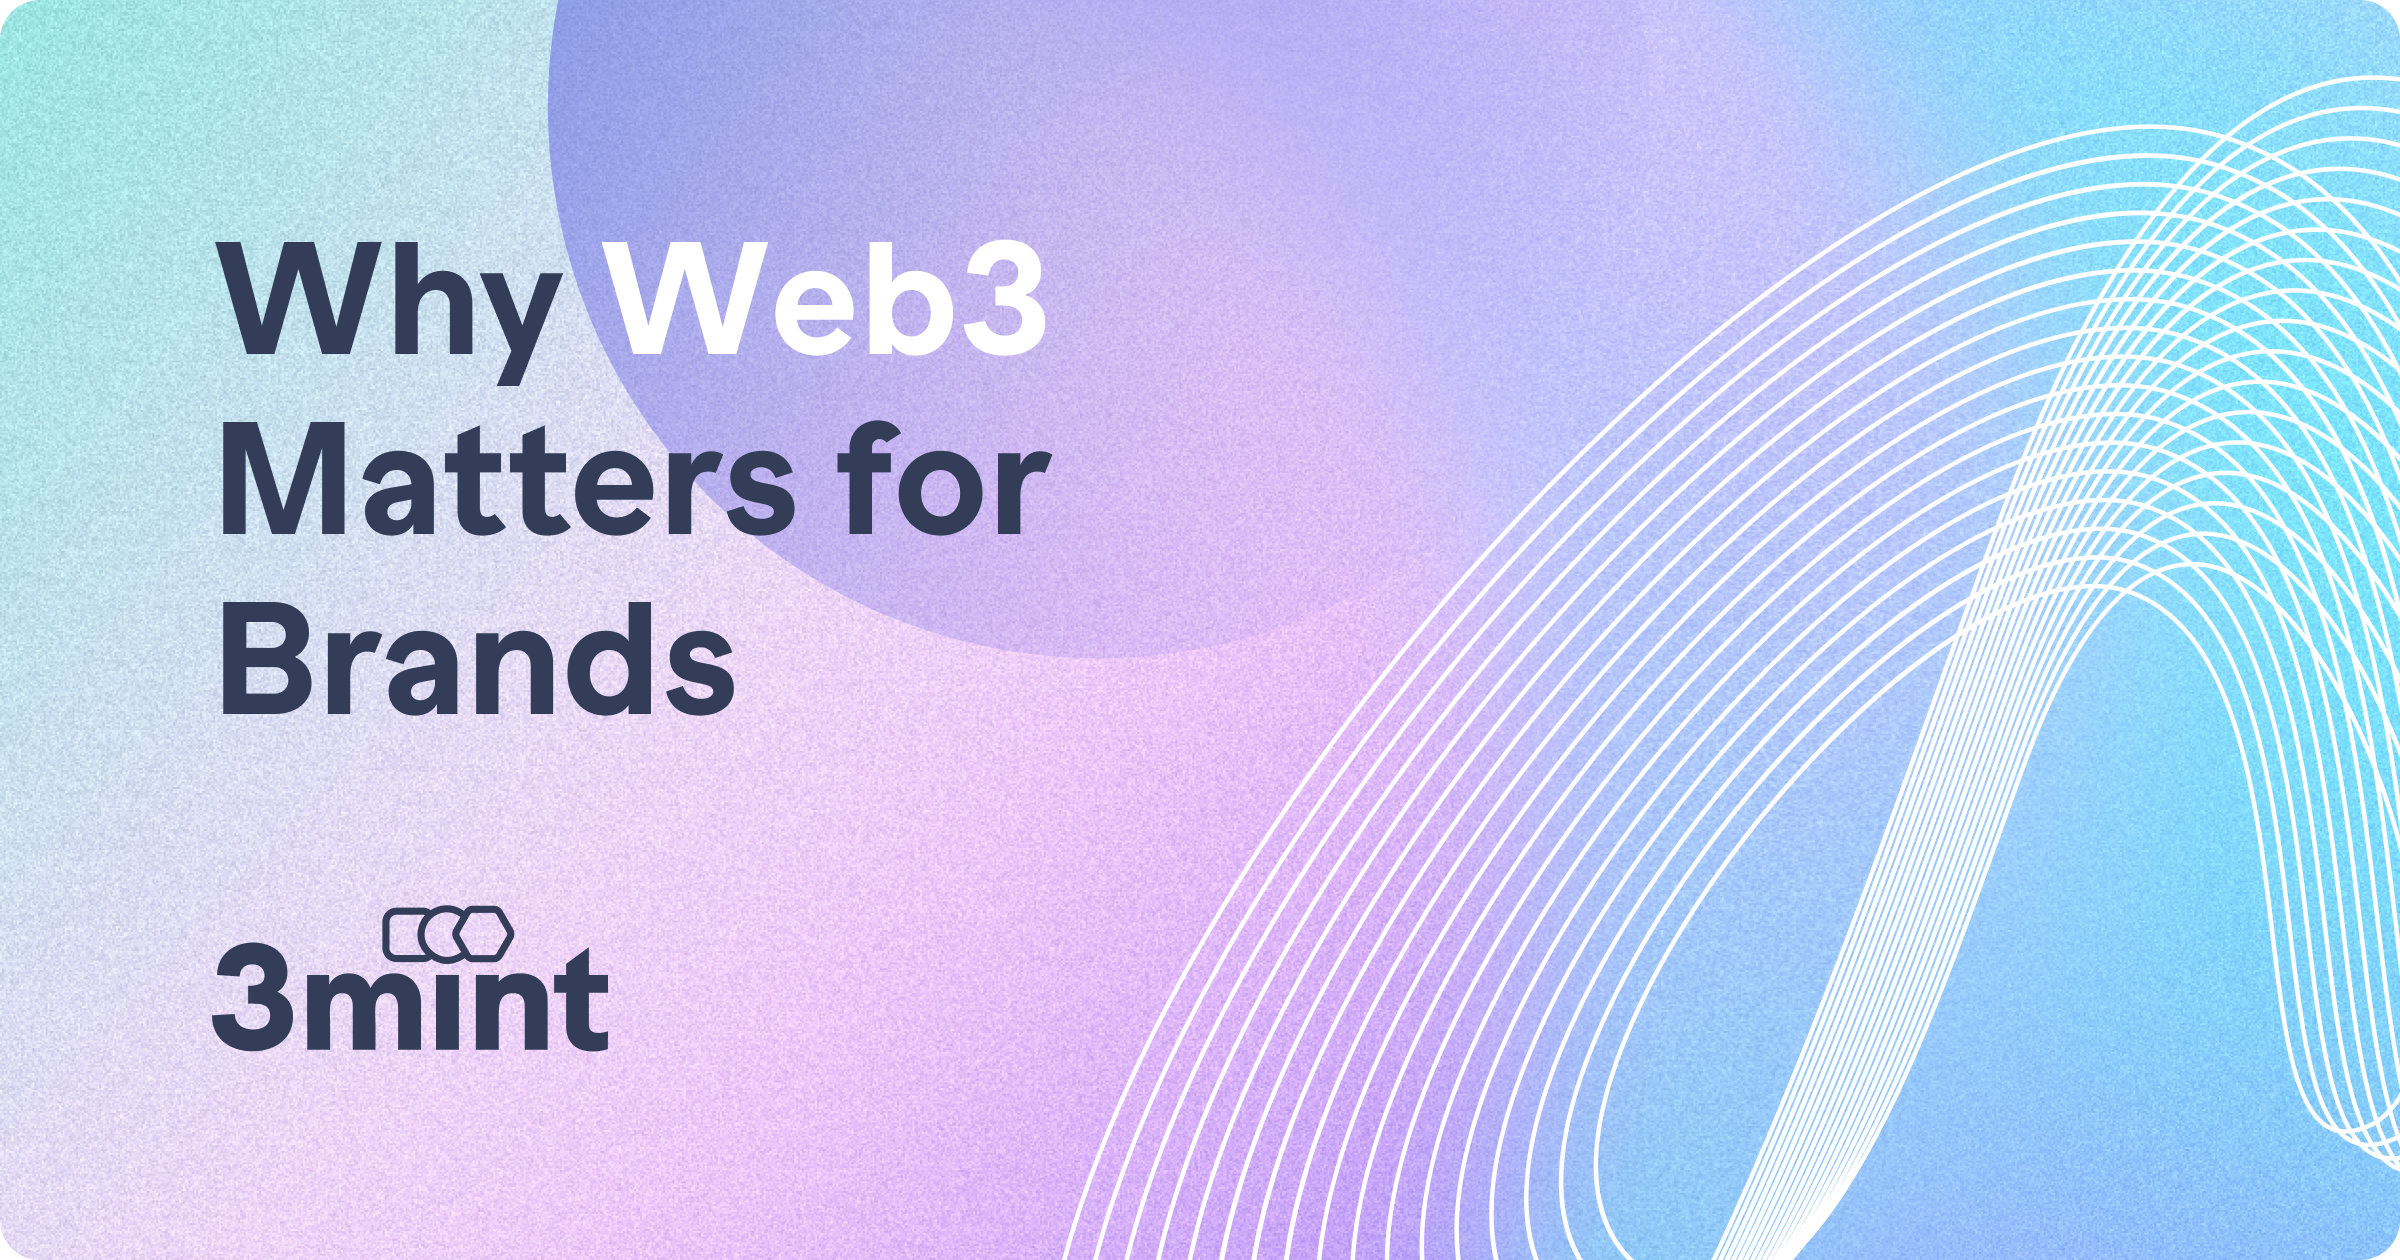 Why Web3 Matters for Brands